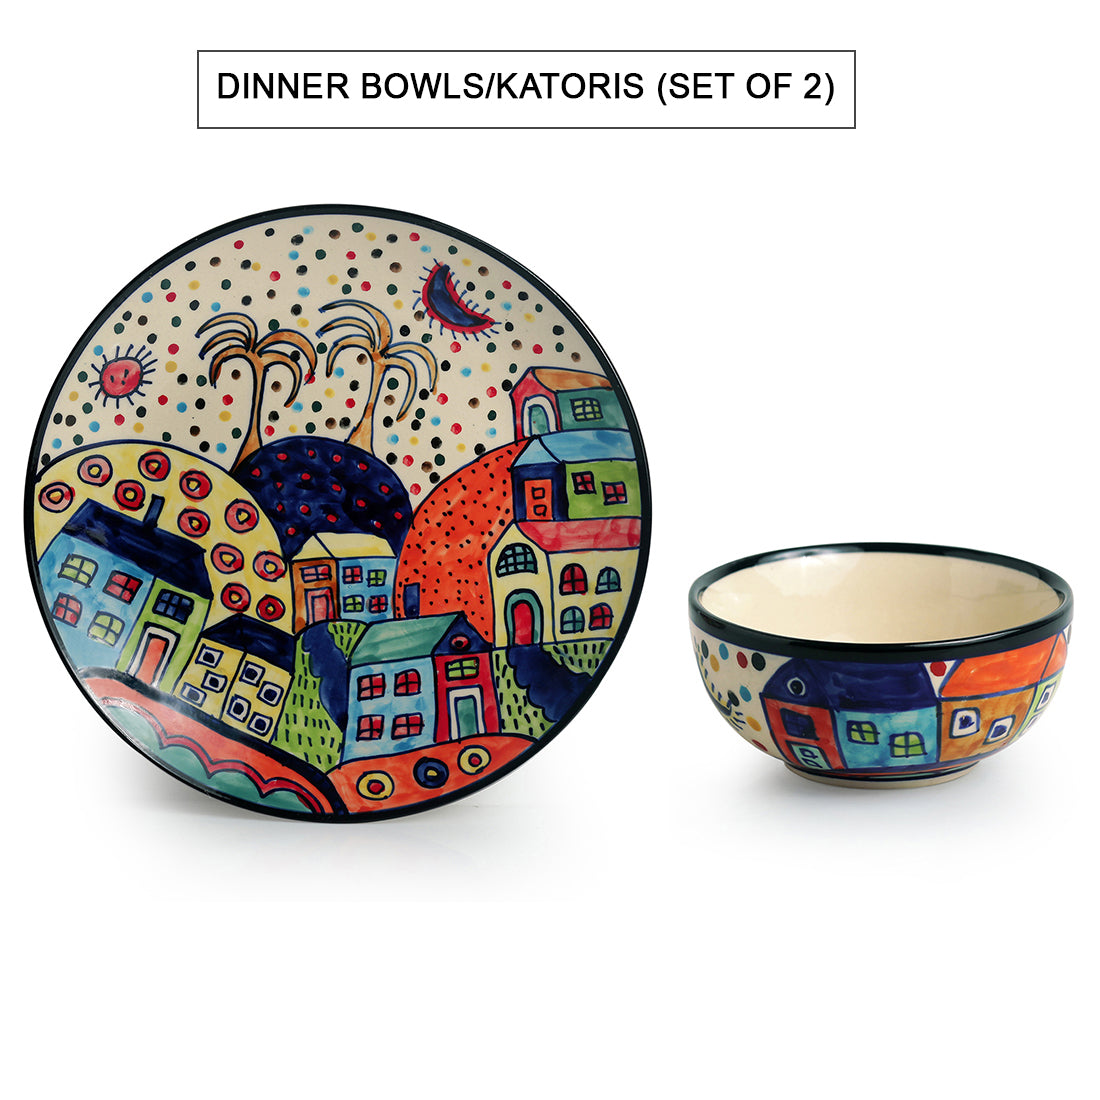 'The Hut Platter Pack' Handpainted Ceramic Plate With Serving Bowls Set